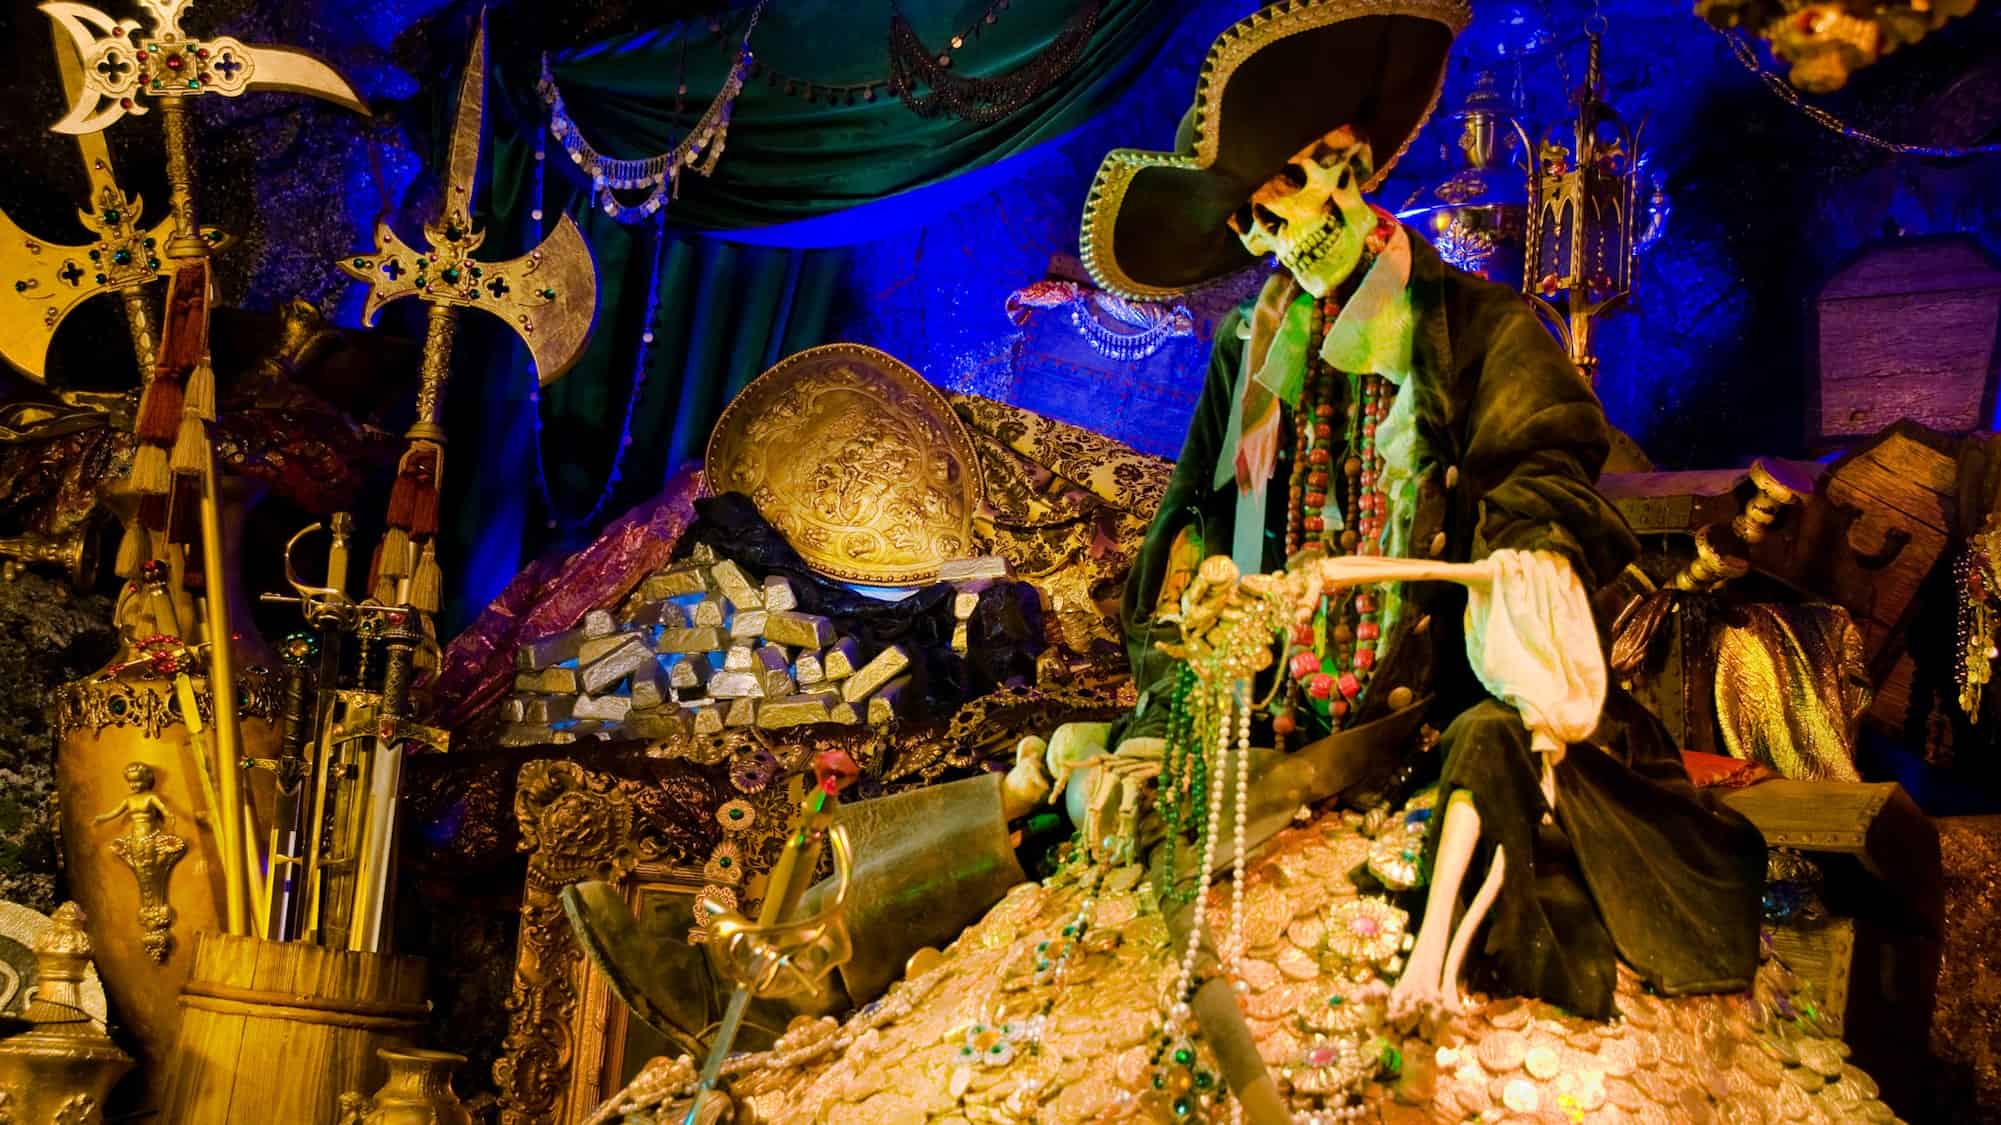 Pirates of the Caribbean ride, creepy facts